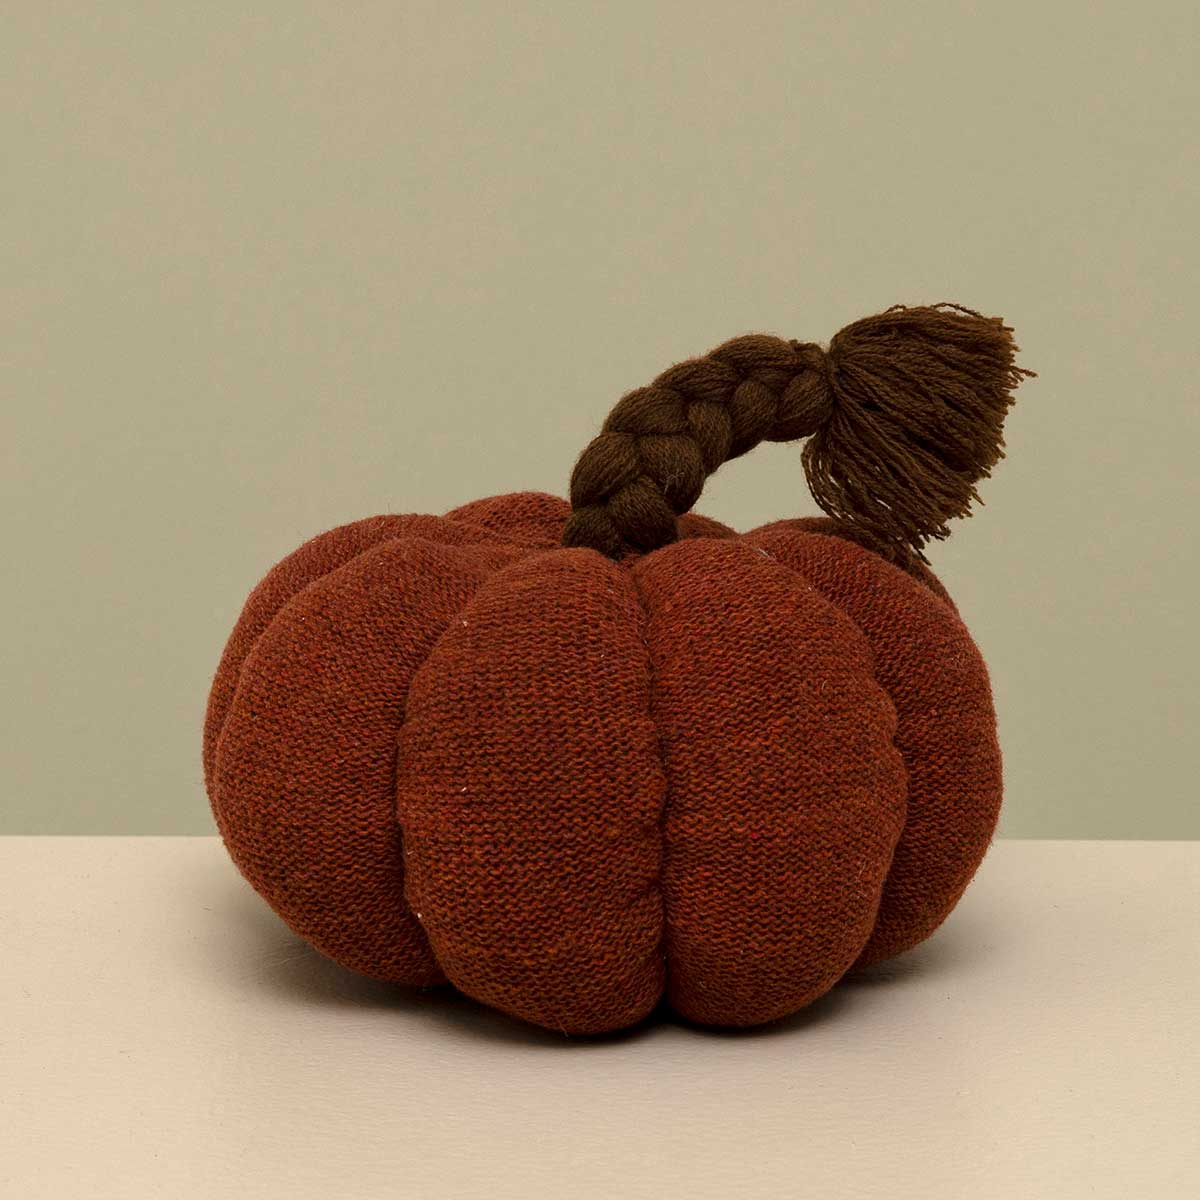 KNIT PUMPKIN PLUSH BURGUNDY WITH BRAIDED STEM LARGE 7"X4" - Click Image to Close